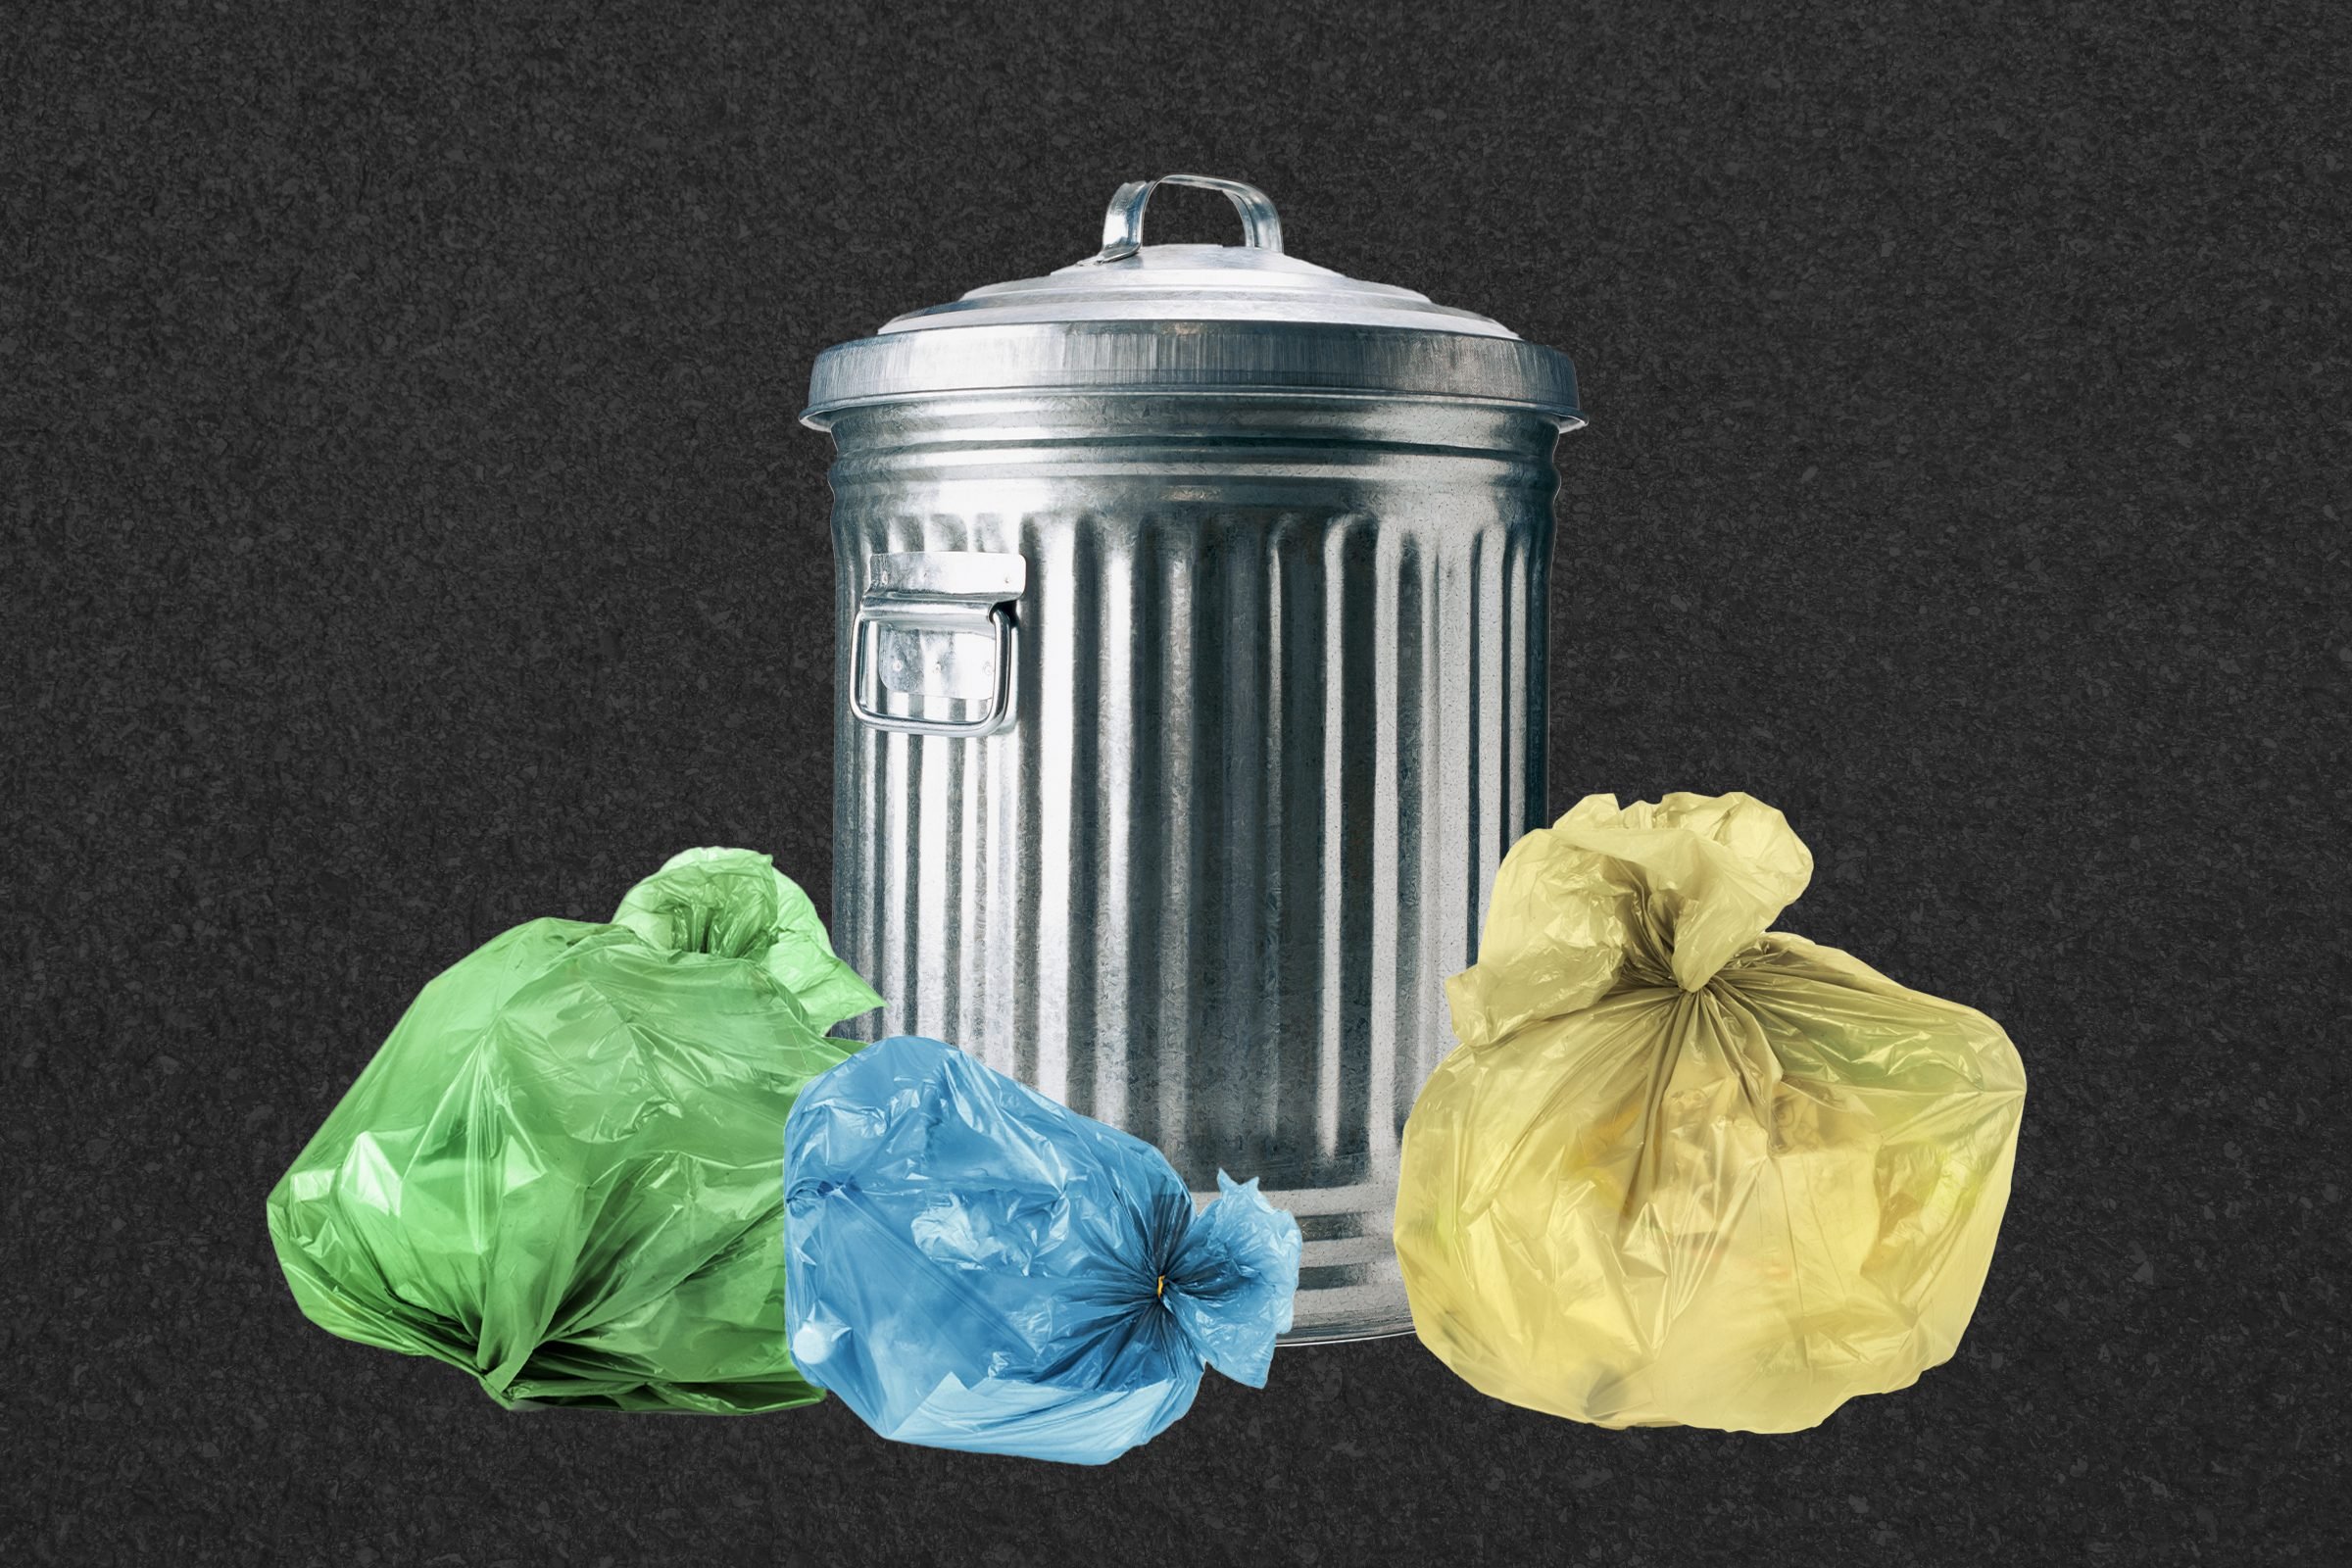 How to Talk About Garbage, Waste, and What's in Your Trash Can in